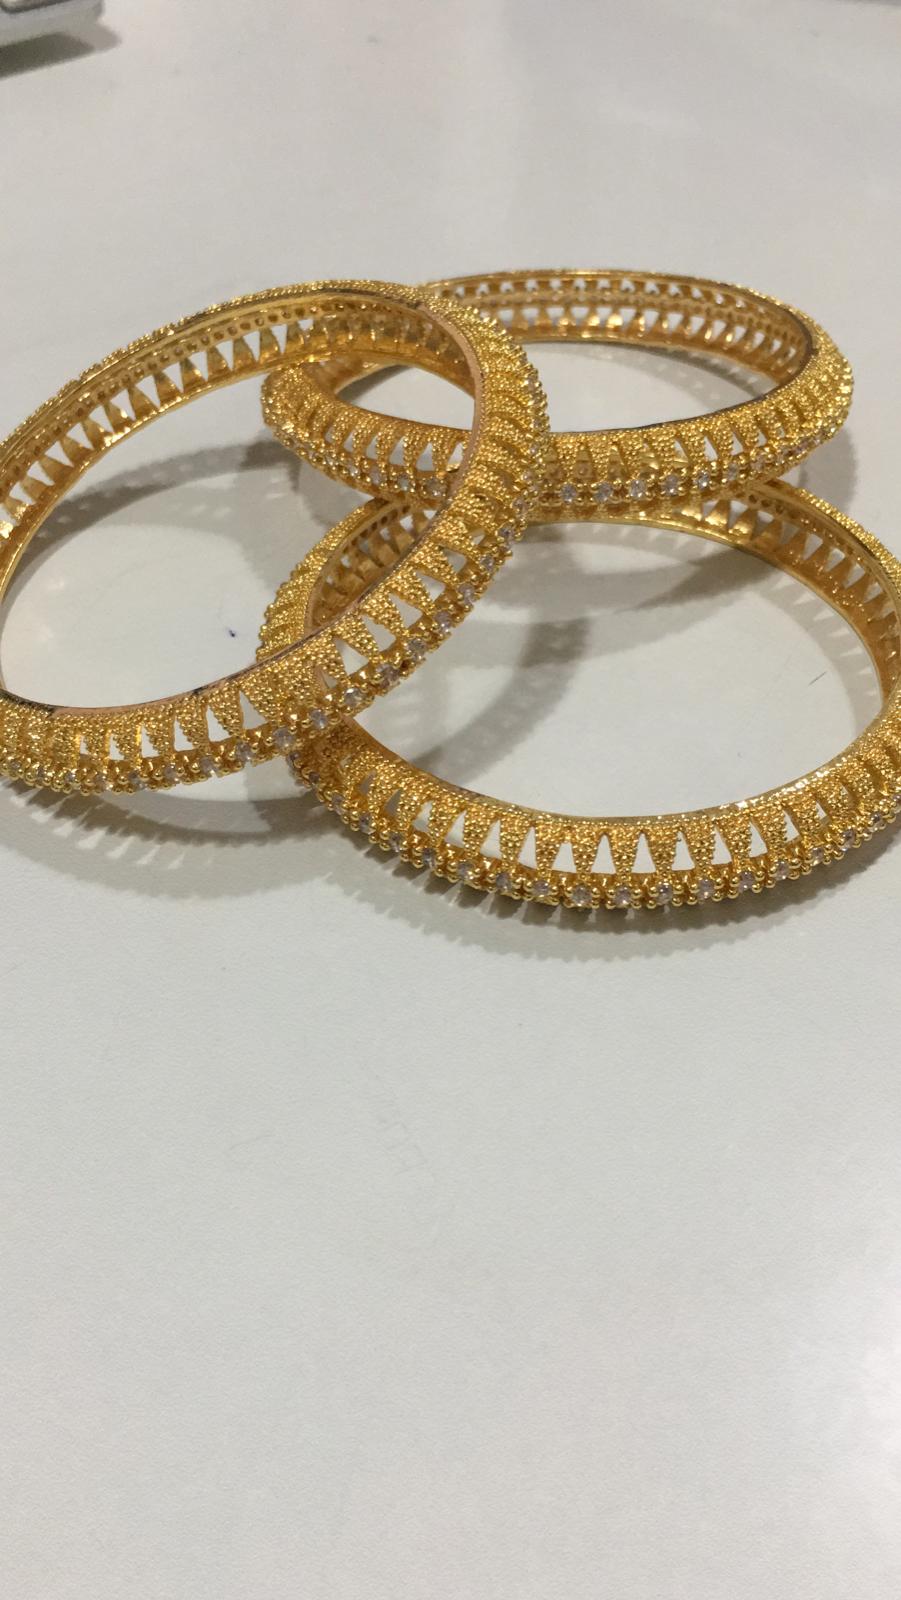 157662C $15.00 1PC BANGLE (GOLD PLATED)